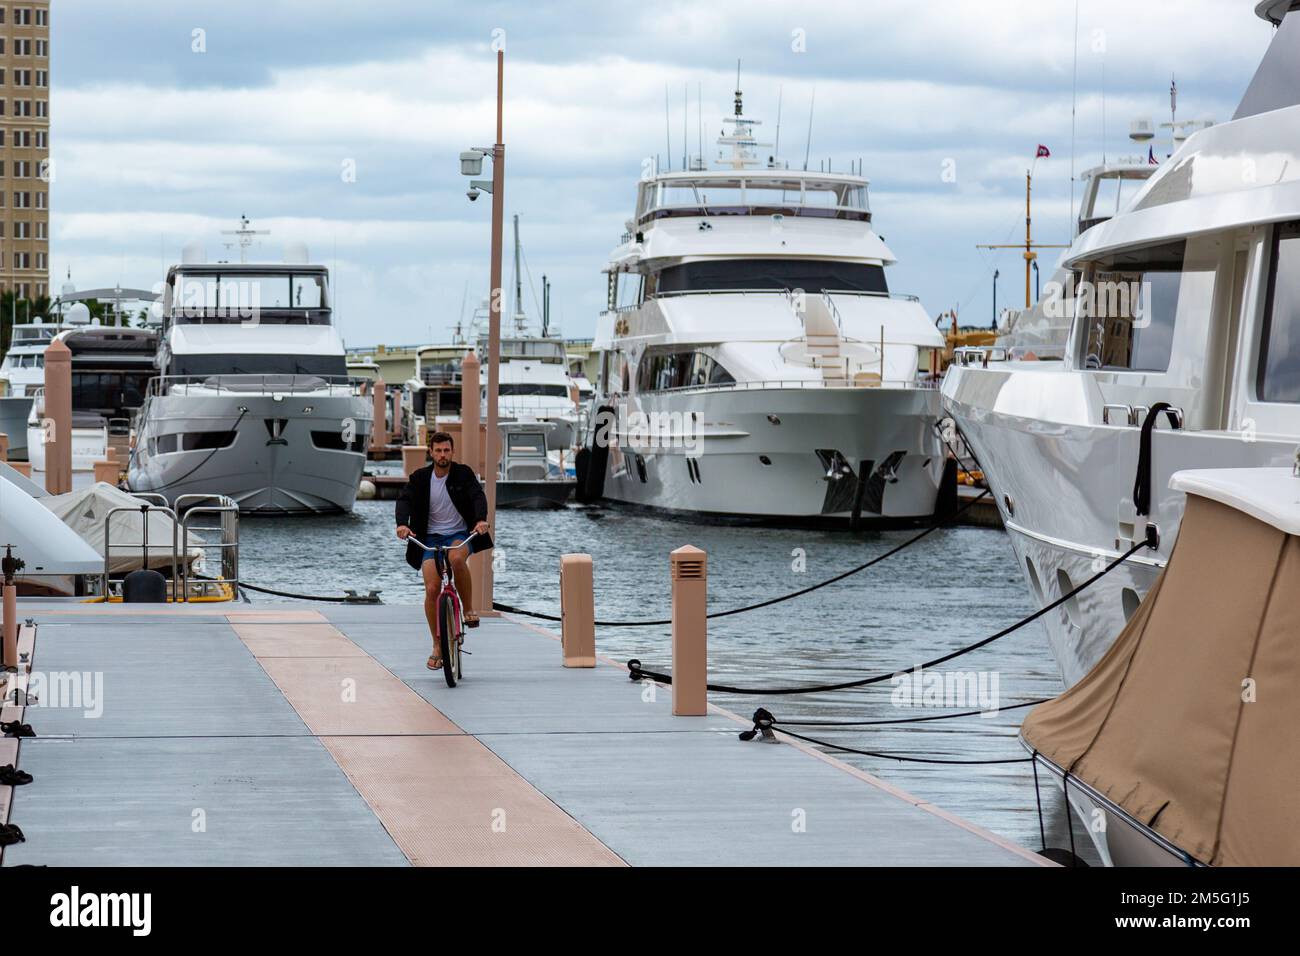 A man rides a bicycle on the pier amid the motor yachts docked at Palm Harbor Marina on the Lake Worth Lagoon in West Palm Beach, Florida, USA. Stock Photo